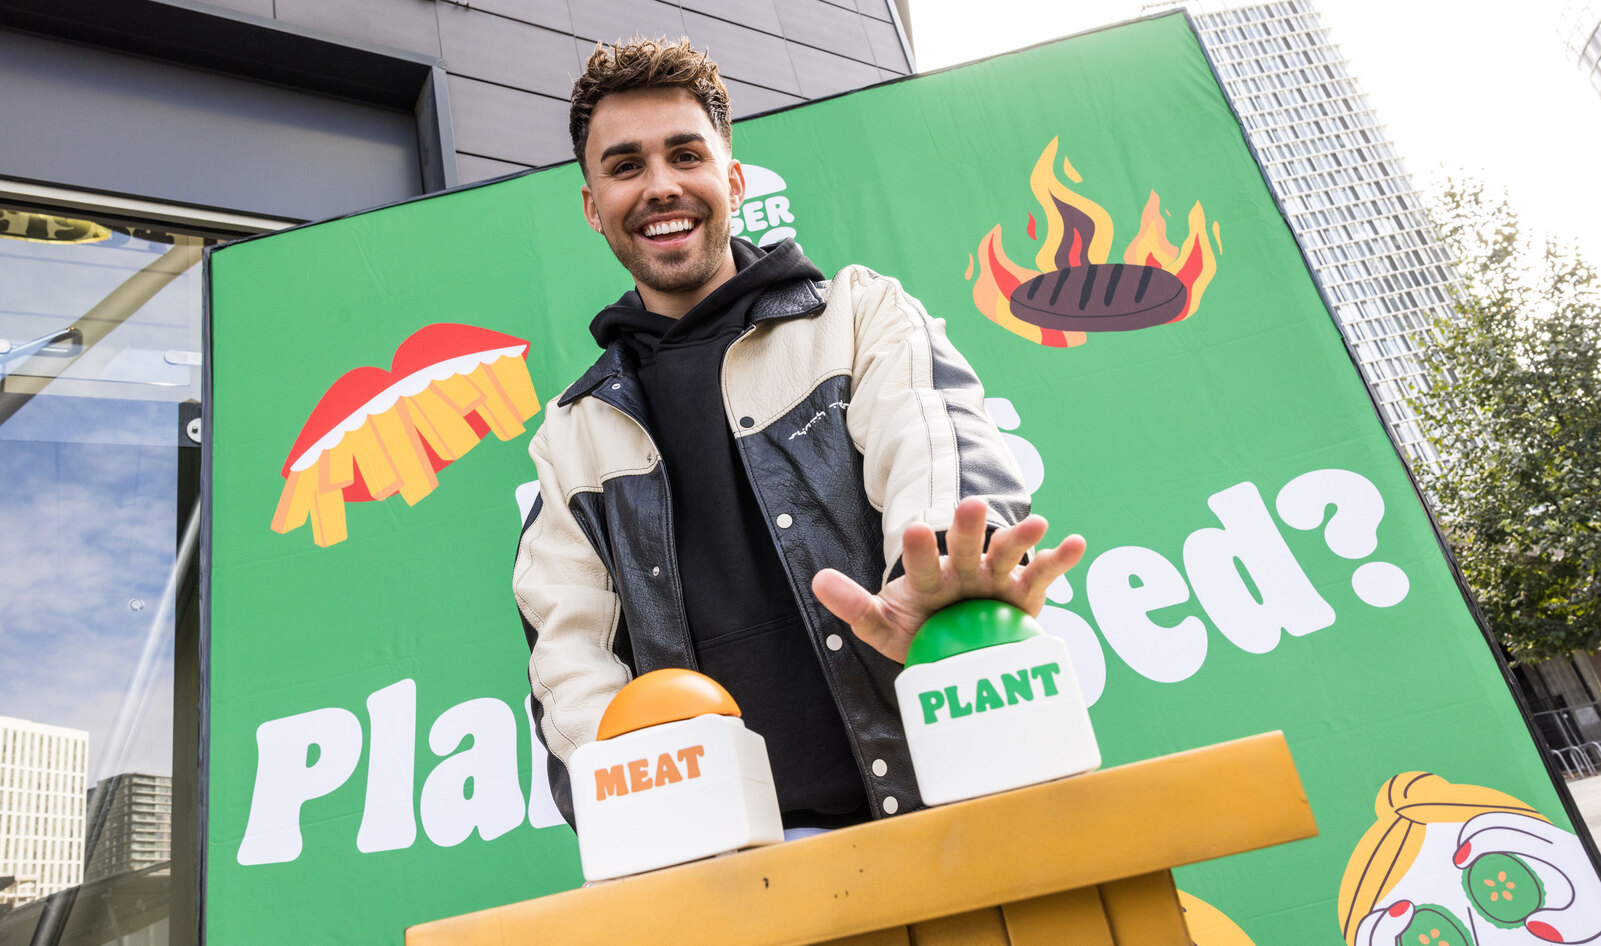 As Europe's Meat Consumption Drops, Burger King Puts Plants to the Test